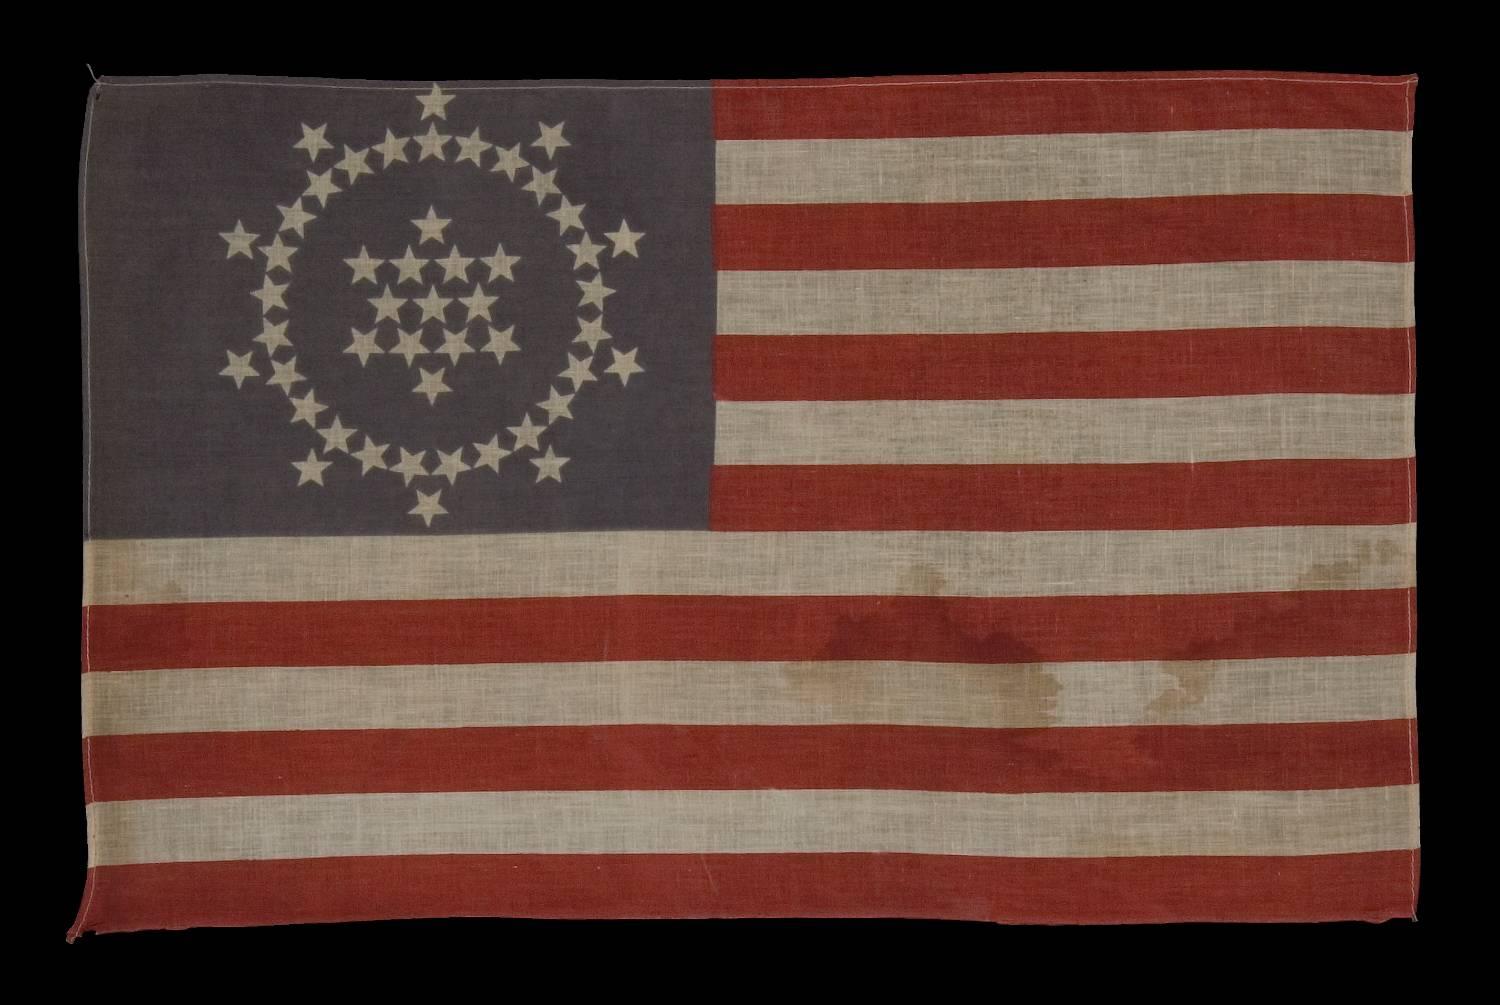 48 stars on an antique American flag designed and commissioned by Wayne Whipple, 1910-1912, a rare and highly desired example:

Many people are not aware that for the first 135 years of the existence of the American national flag, there was no